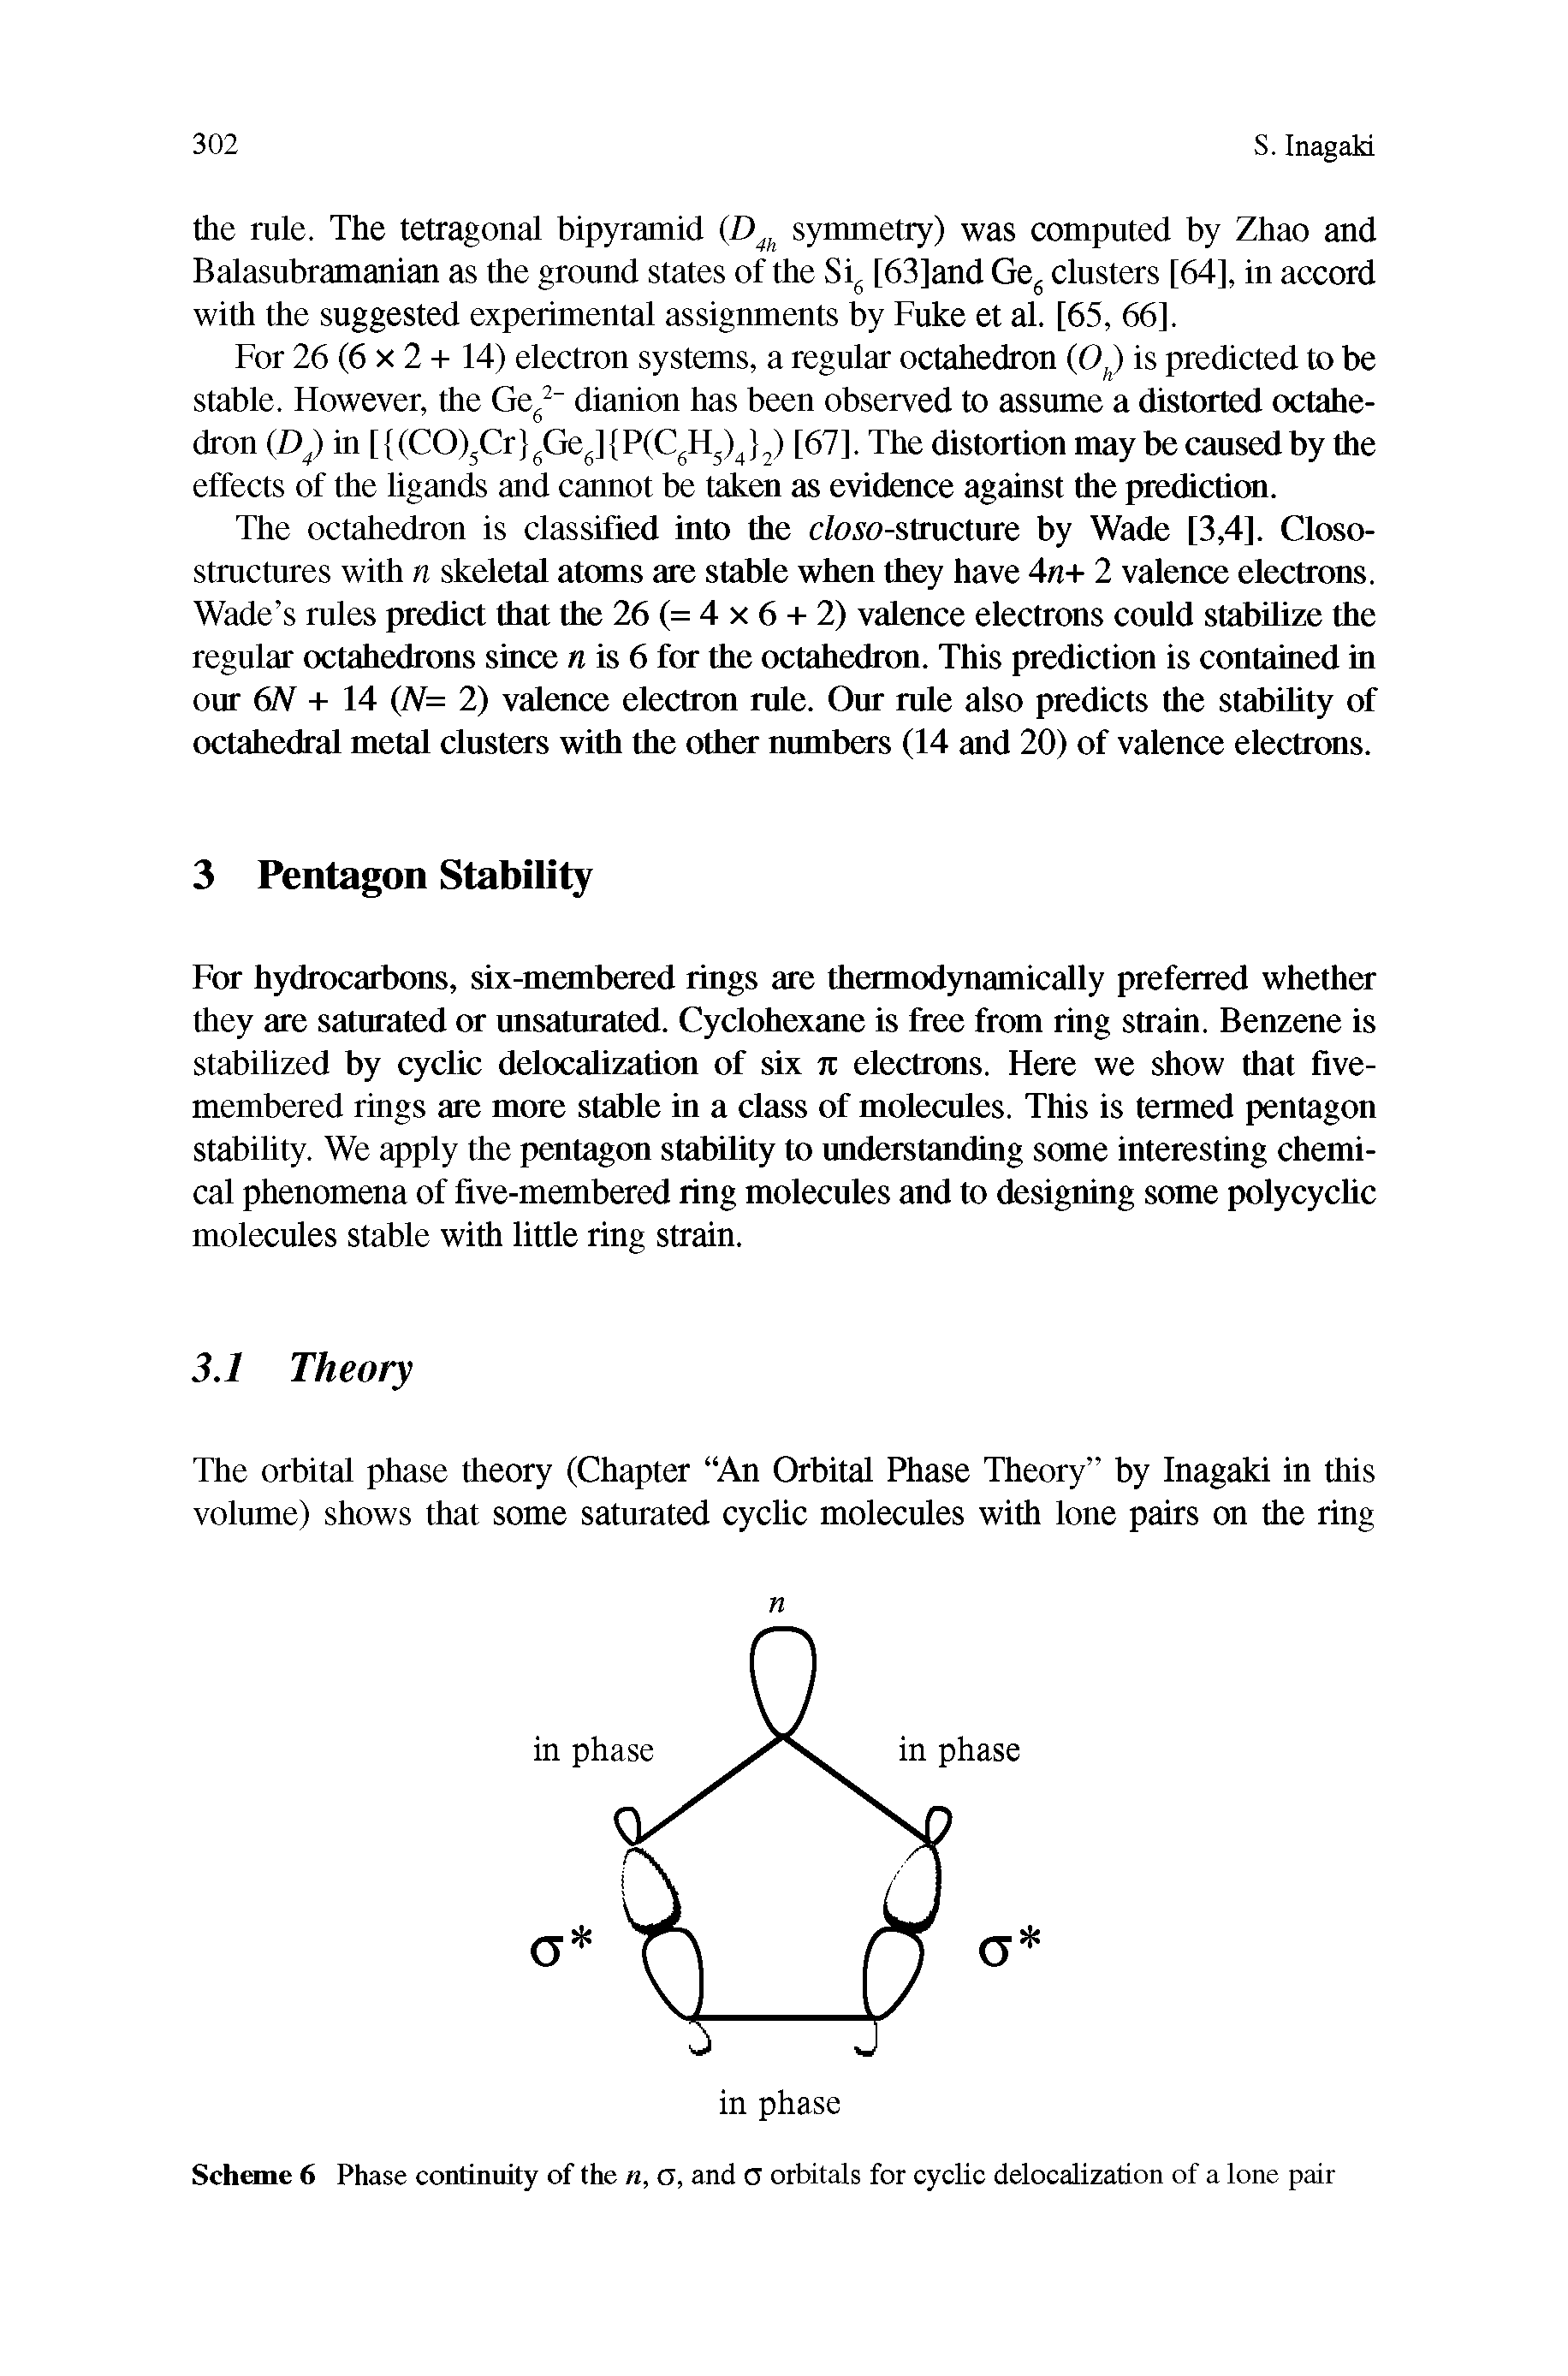 Scheme 6 Phase continuity of the n, a, and O orbitals for cyclic delocalization of a lone pair...